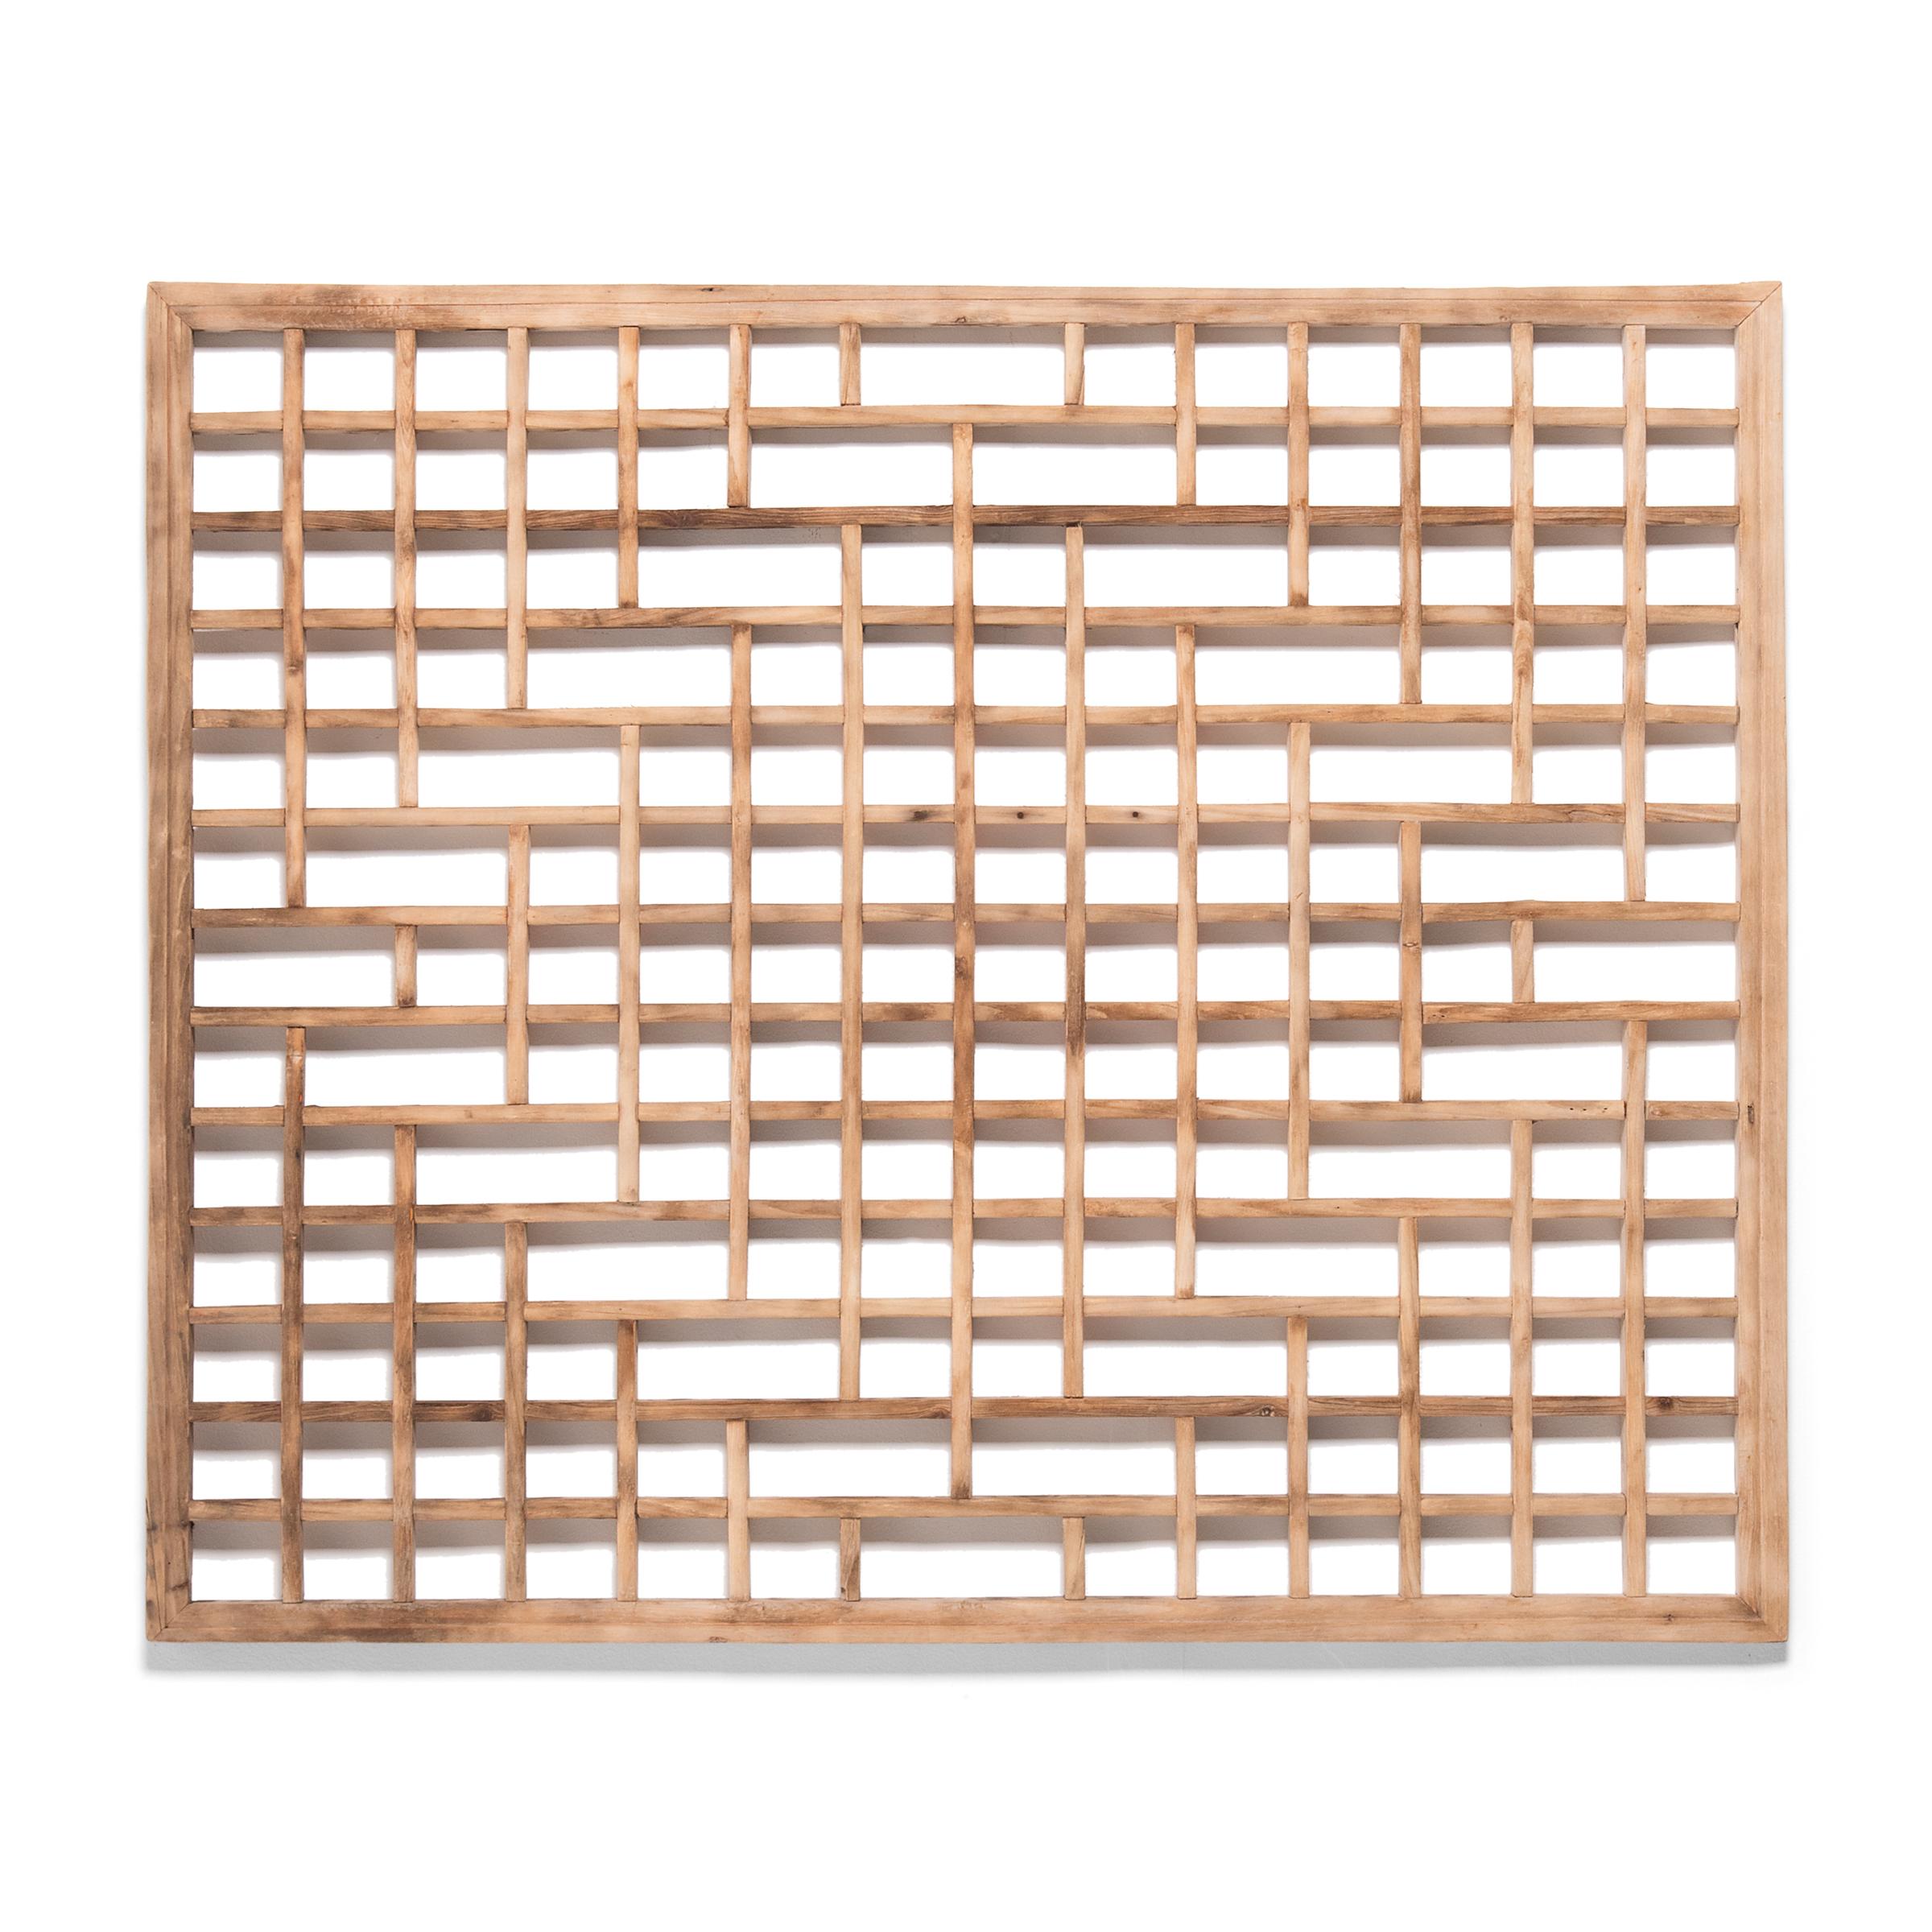 This early 20th century lattice window panel likely originated in a northern Chinese home with neutral and balanced interiors. The geometric lattice pattern is linear and open, and was designed to allow light and air into a room while maintaining